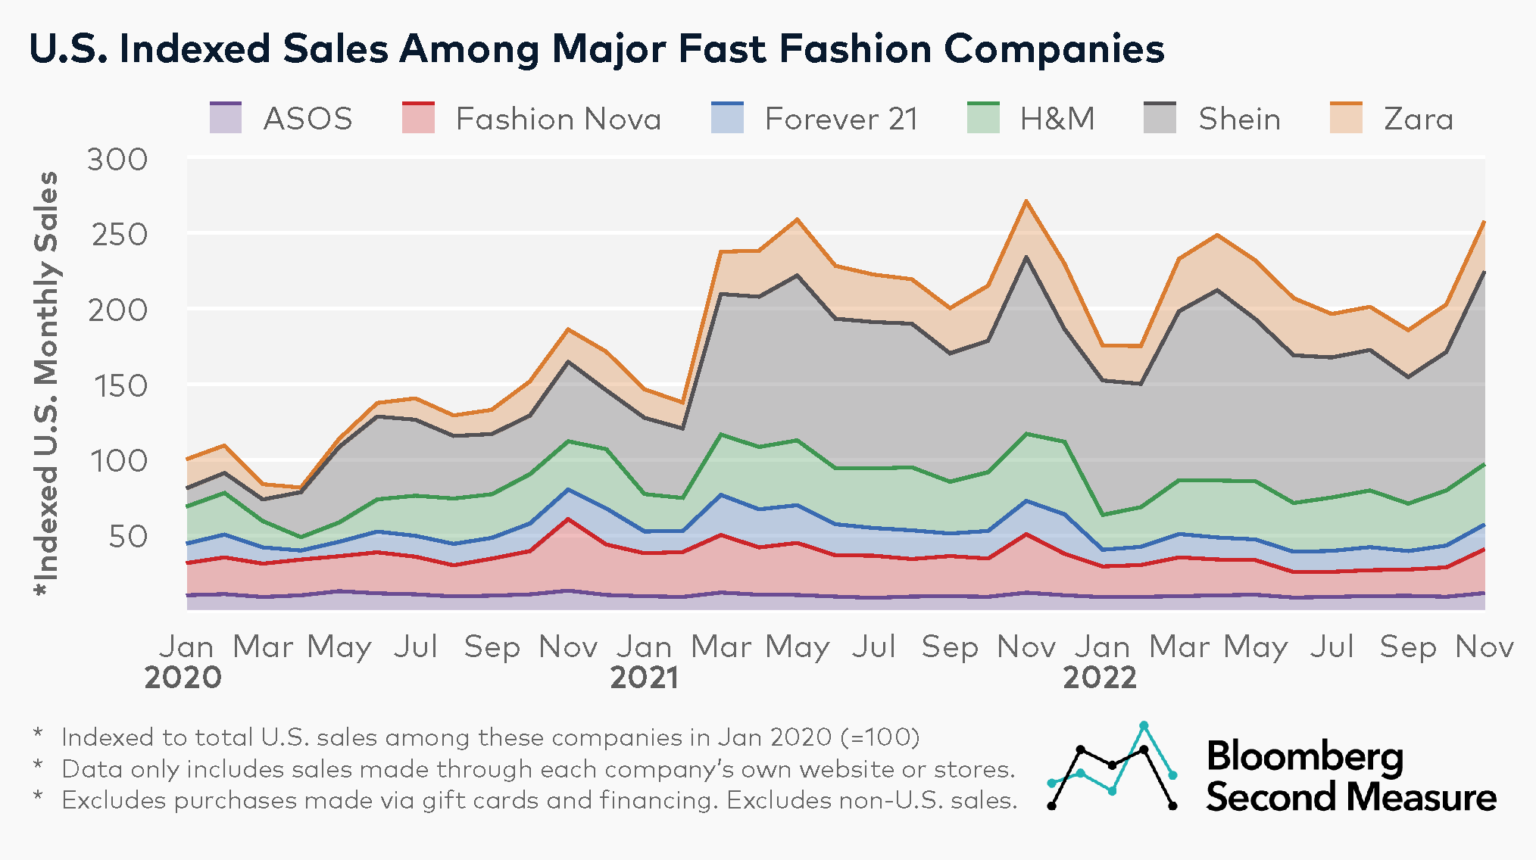 Shein’s growth skyrocketed in early 2020. Source: Bloomberg Second Measure